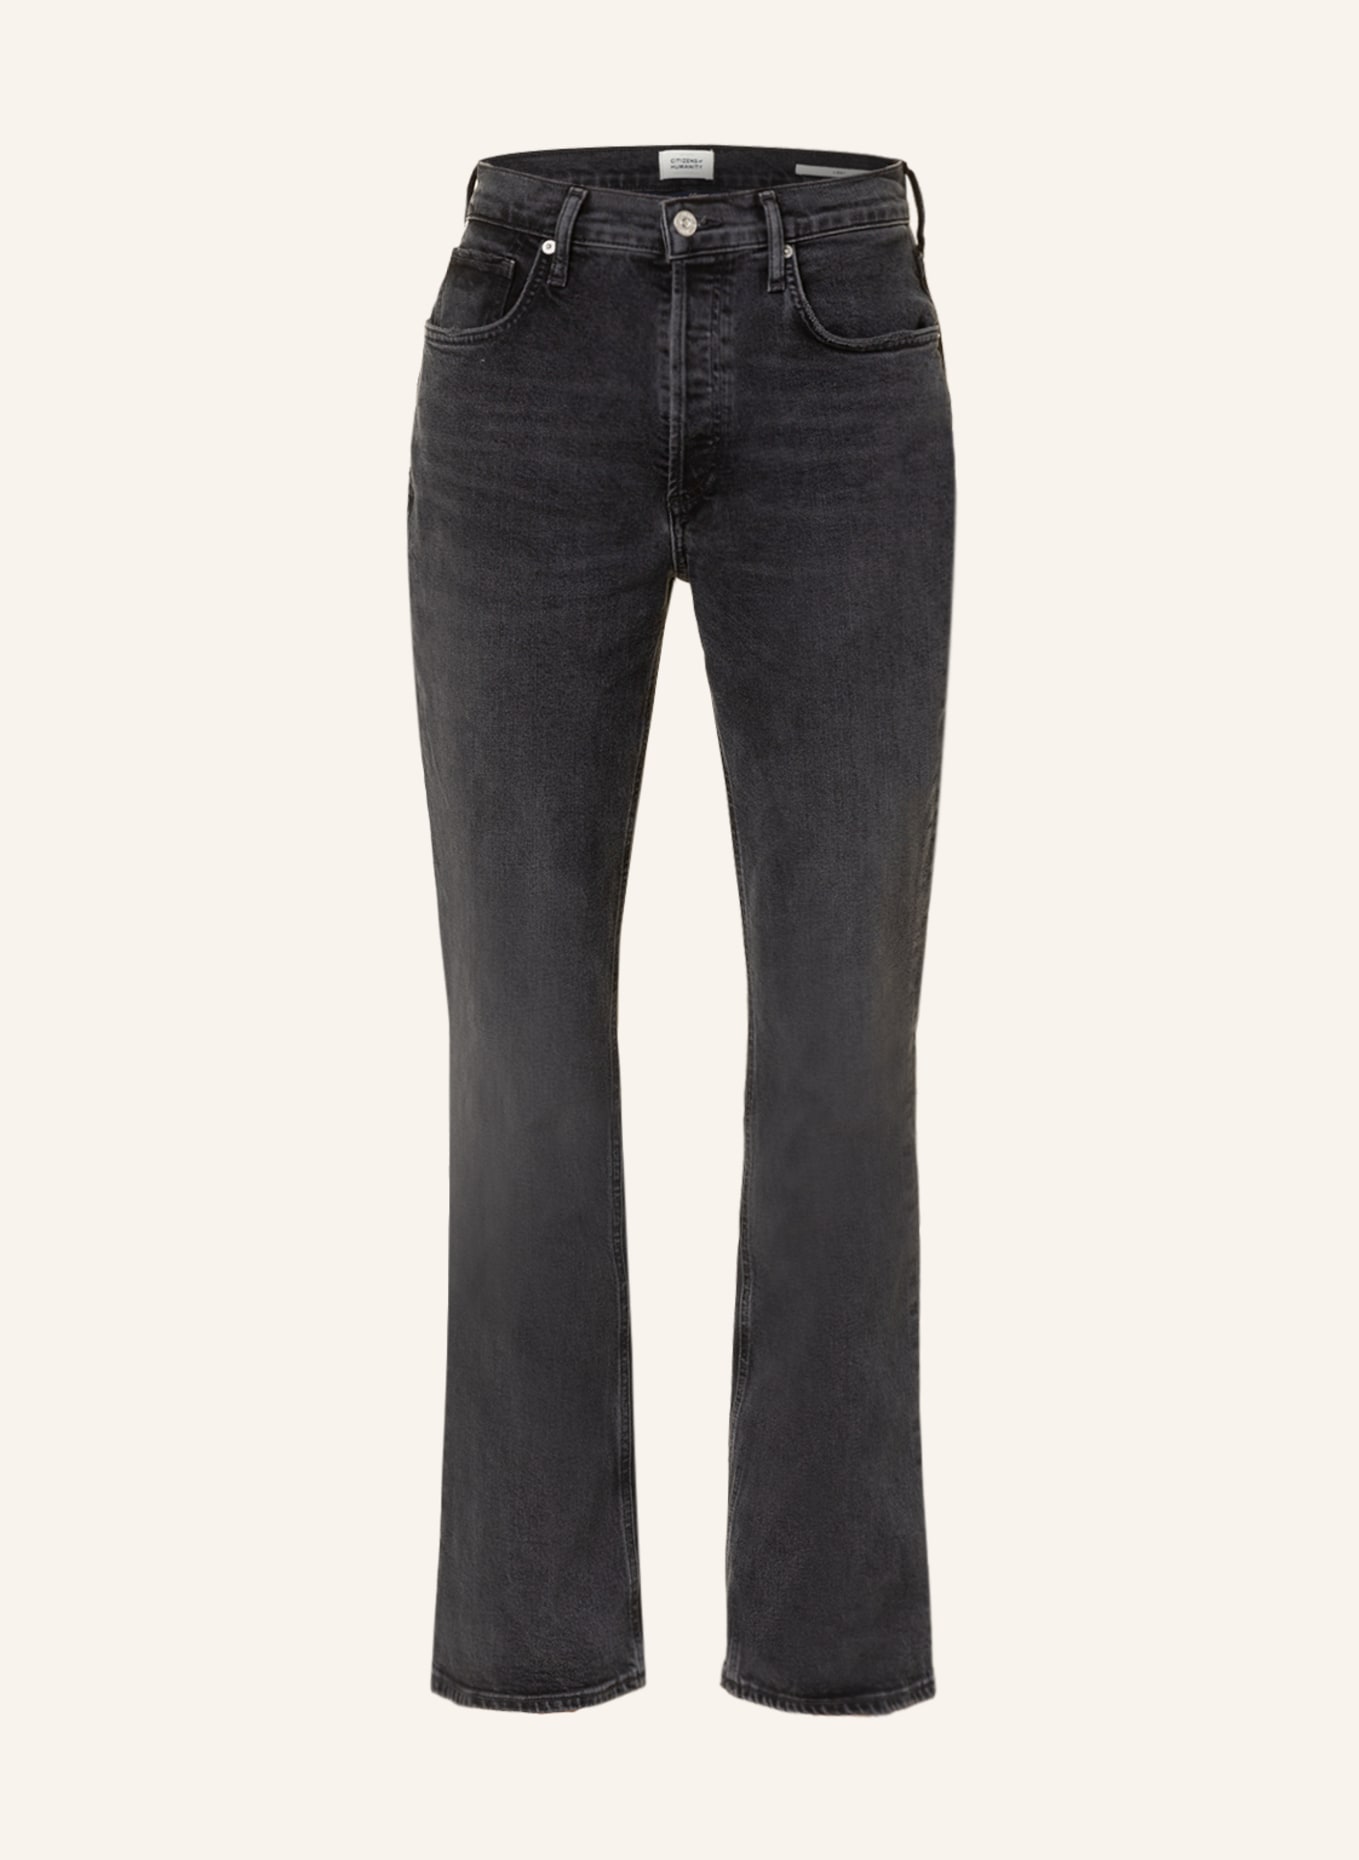 CITIZENS of HUMANITY Bootcut Jeans LIBBY, Farbe: Lights Out washed black (Bild 1)